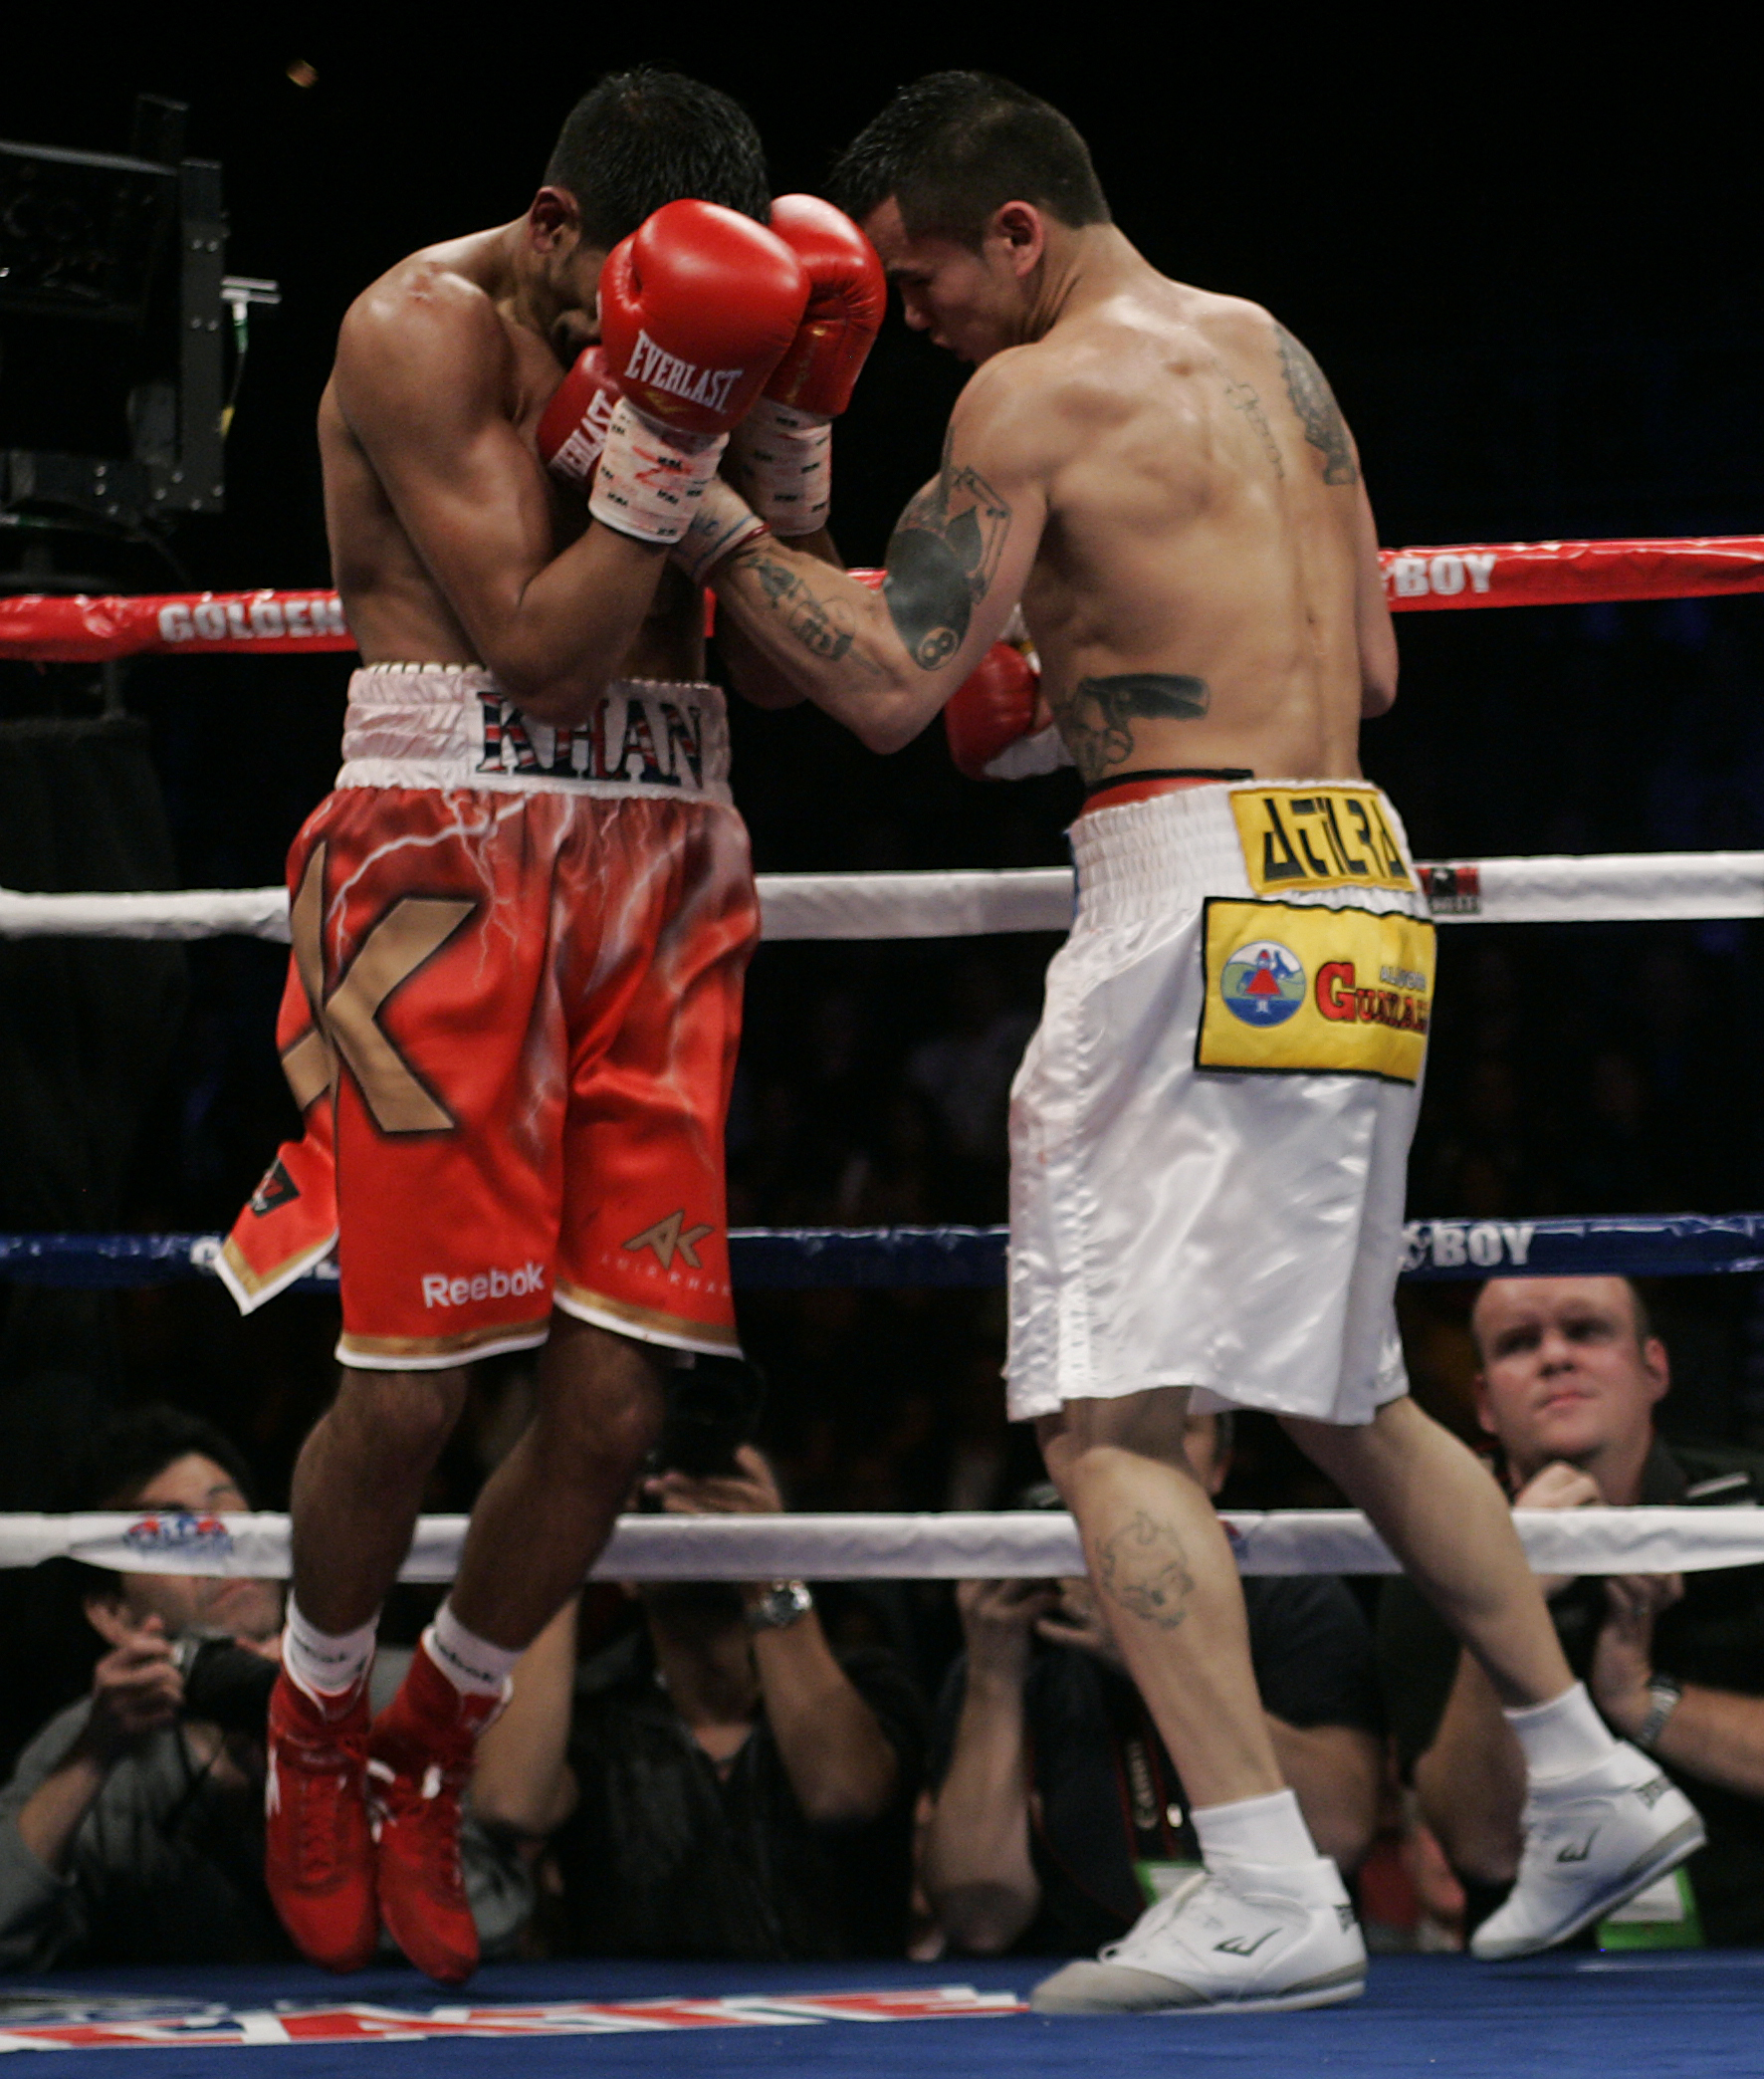 Look For Khan To Fold As Soon As Maidana Connects With His First